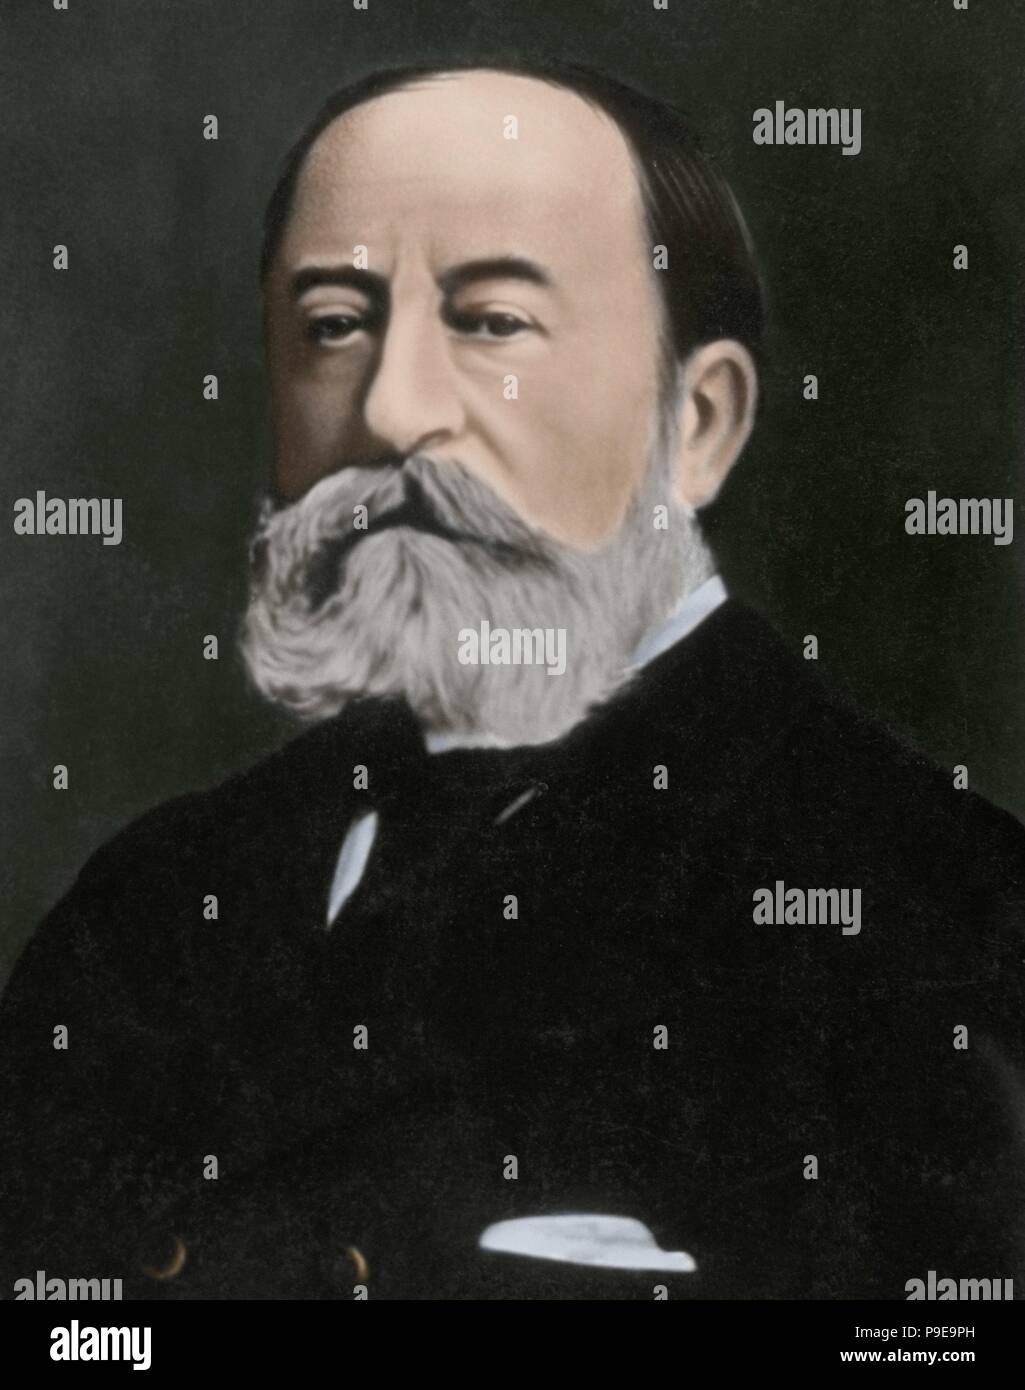 Camille Saint-Saens (1835-1921). French composer, organist, conductor and pianist. Romantic era. Portrait. Photography. Colored. Stock Photo